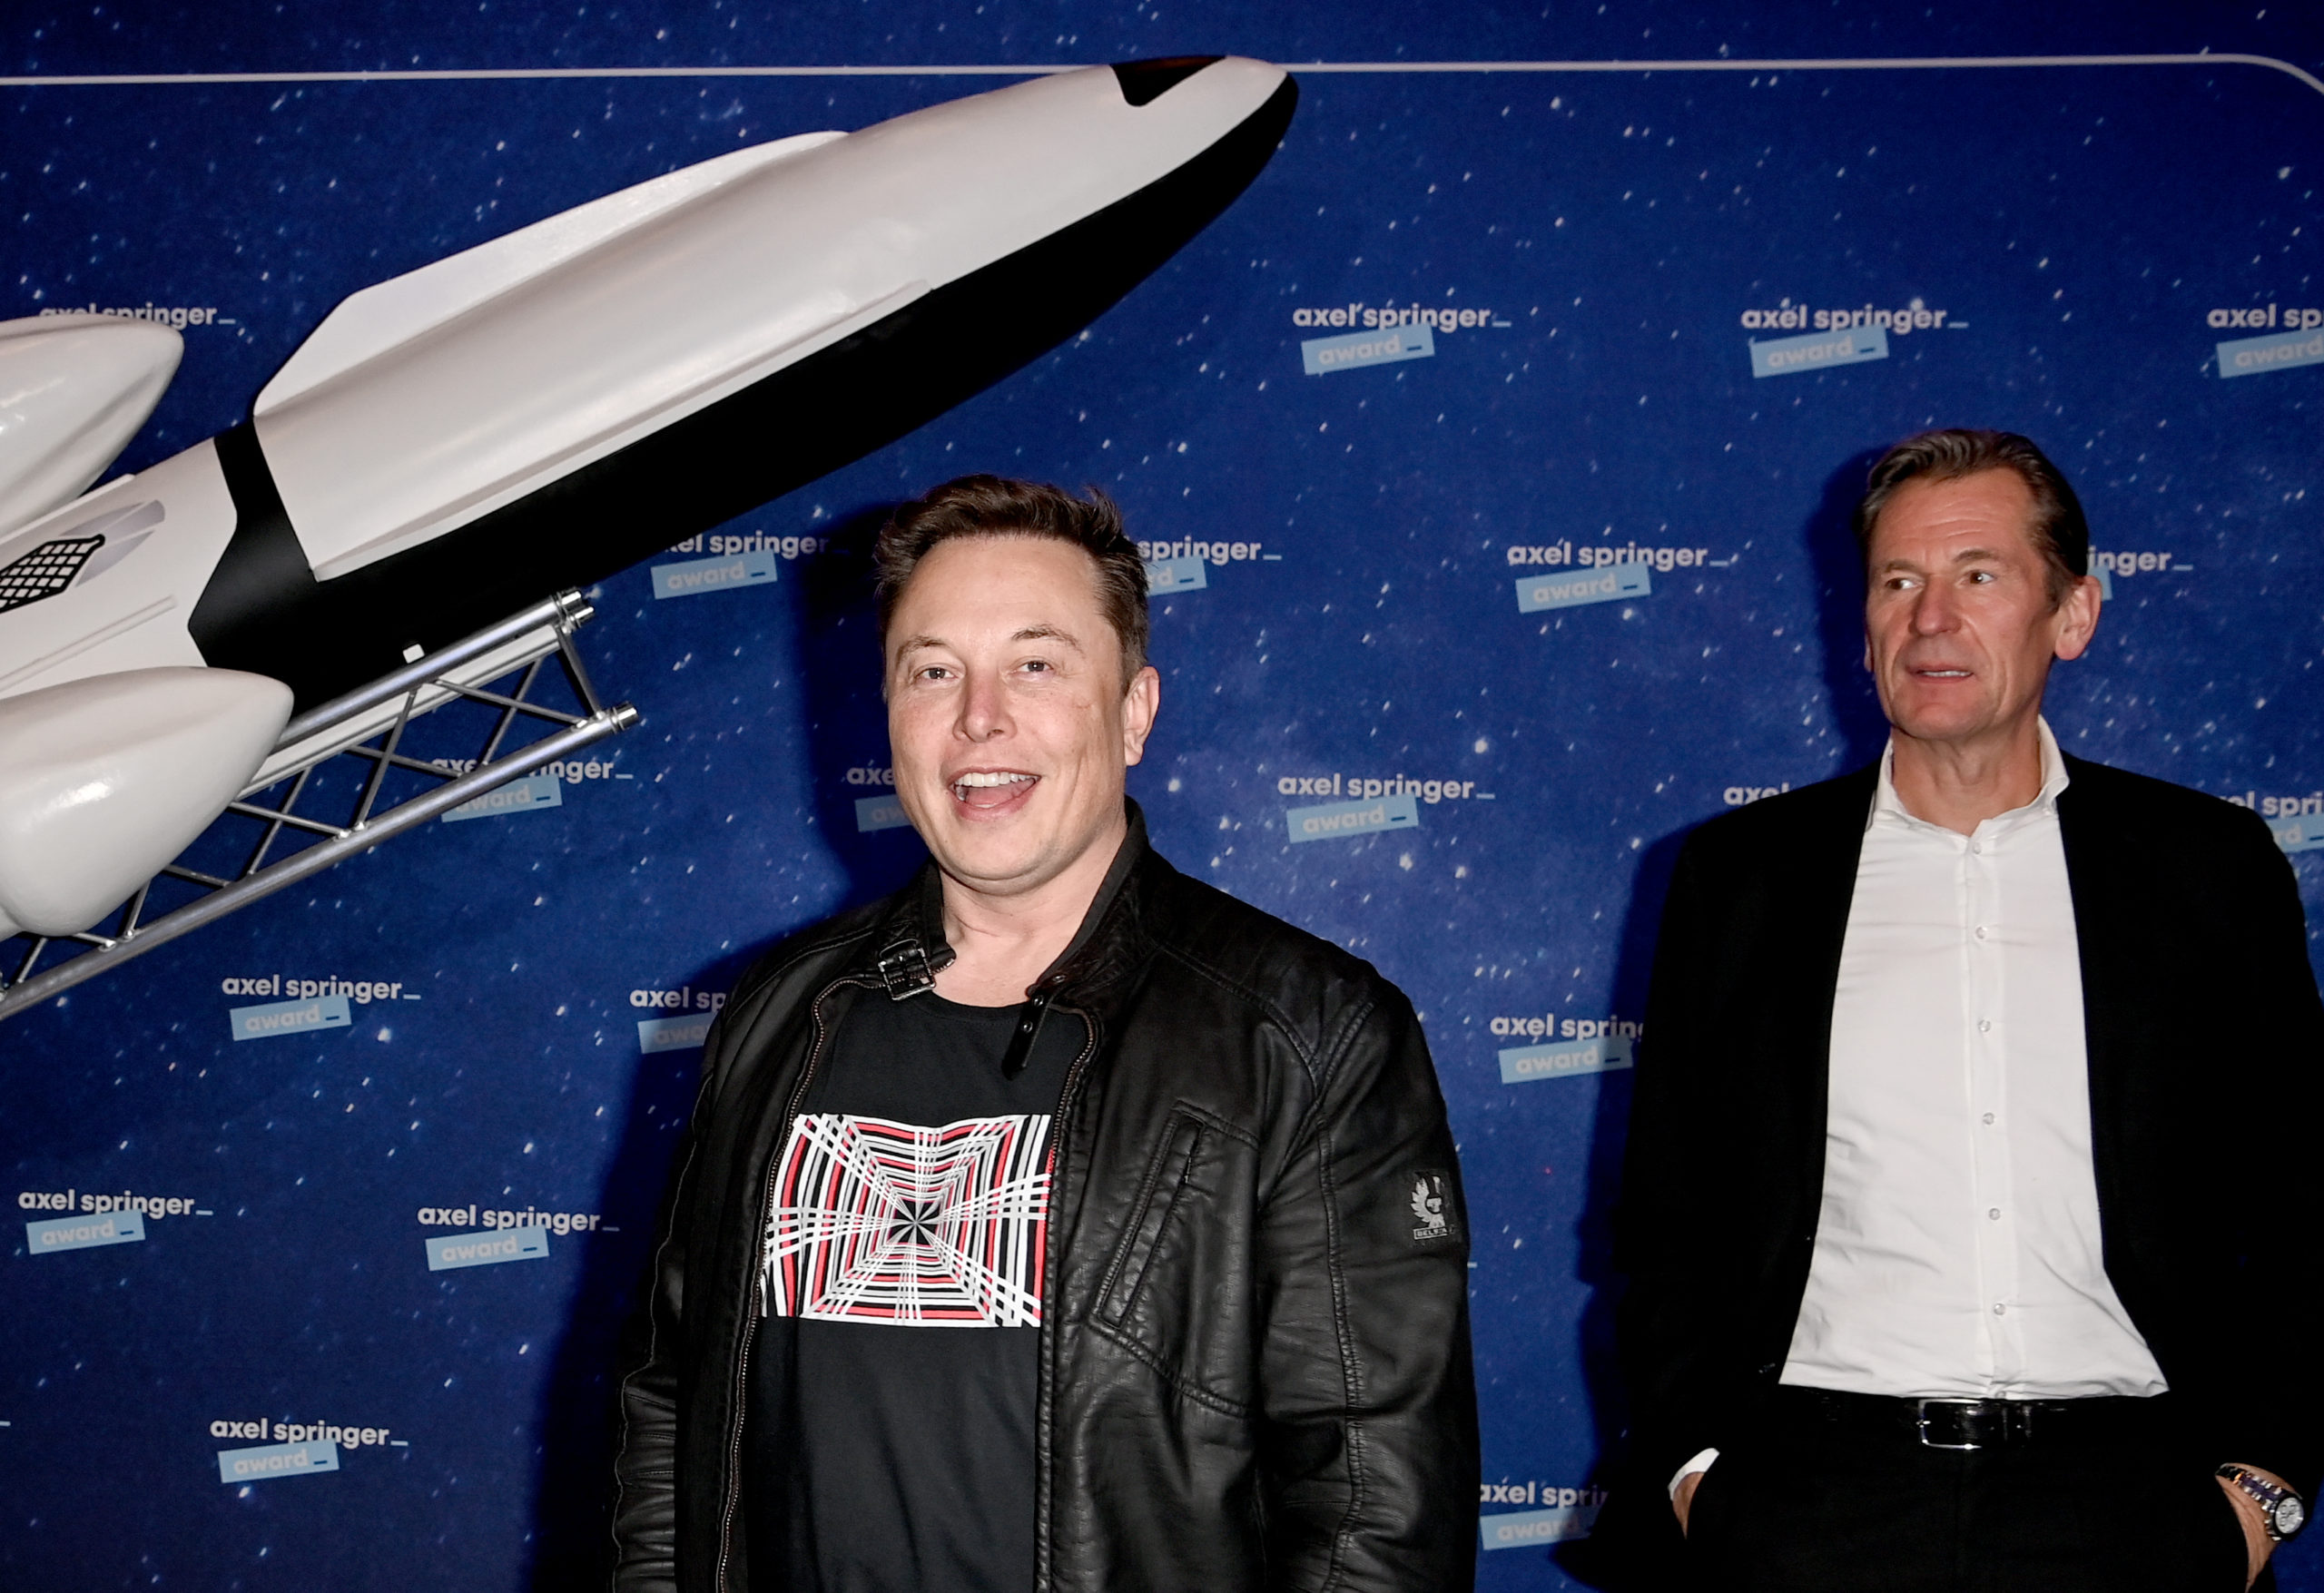 Court Documents: Politico Boss Offered to Run Twitter for Musk - The American Conservative